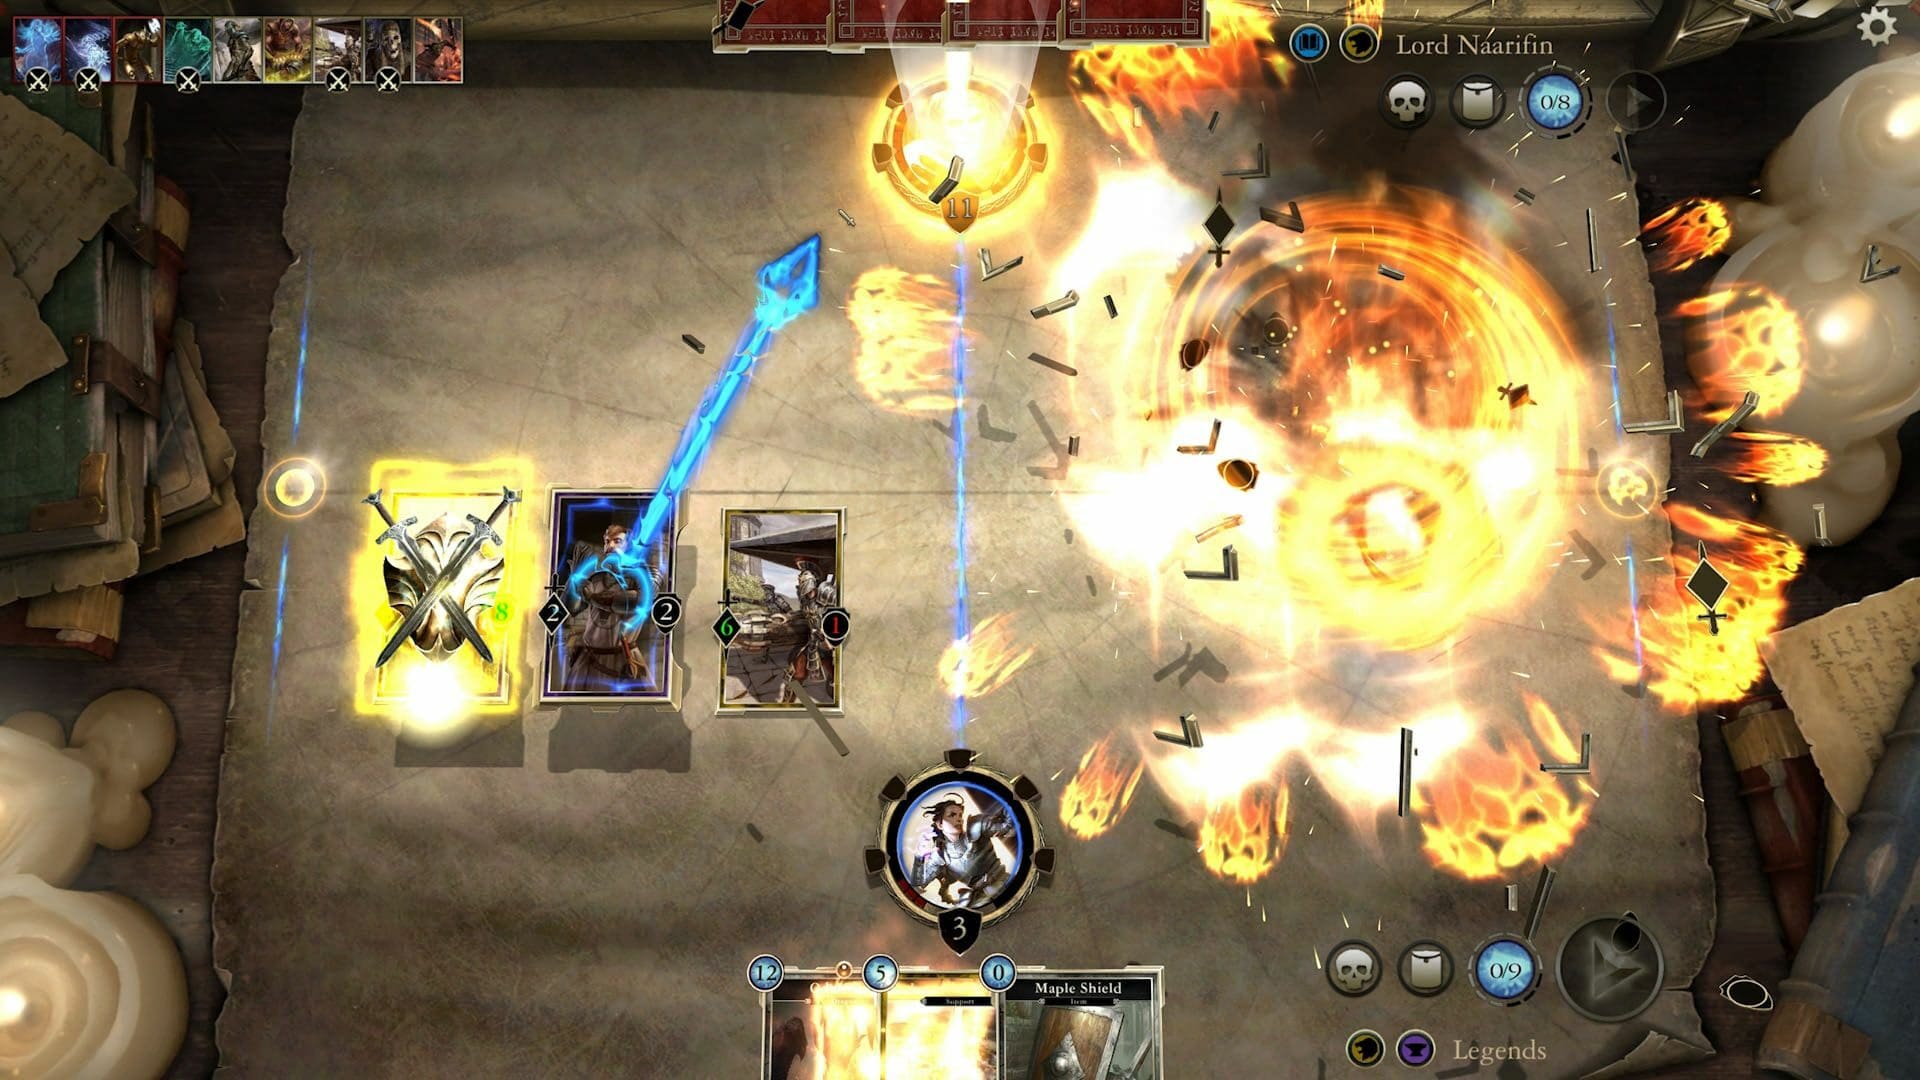 The Chaos Arena Returns to The Elder Scrolls: Legends This Week